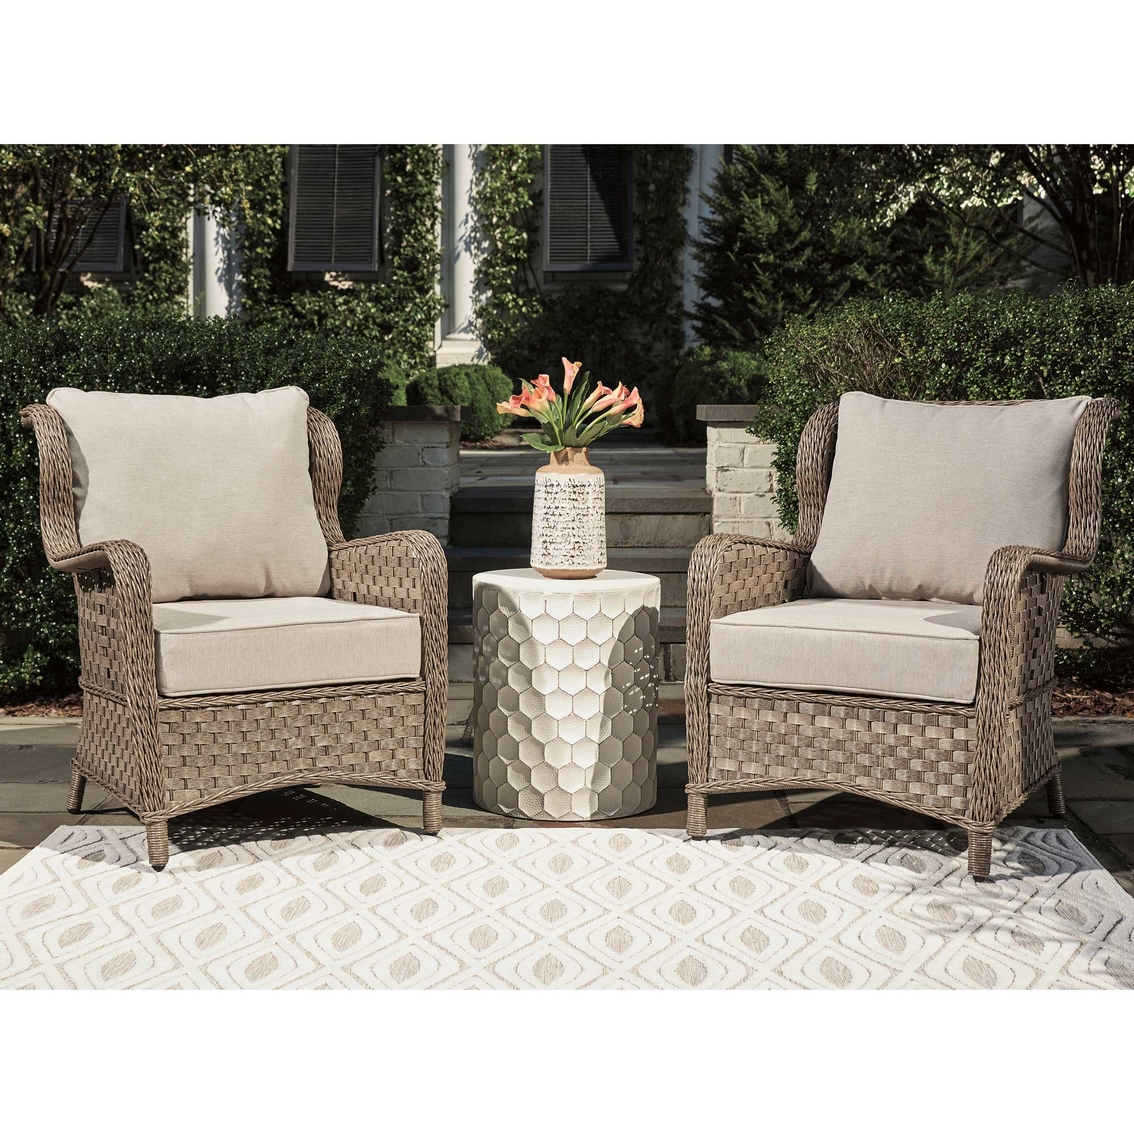 Signature Design by Ashley Clear Ridge Outdoor Lounge Chair 2 pk. - Image 2 of 6